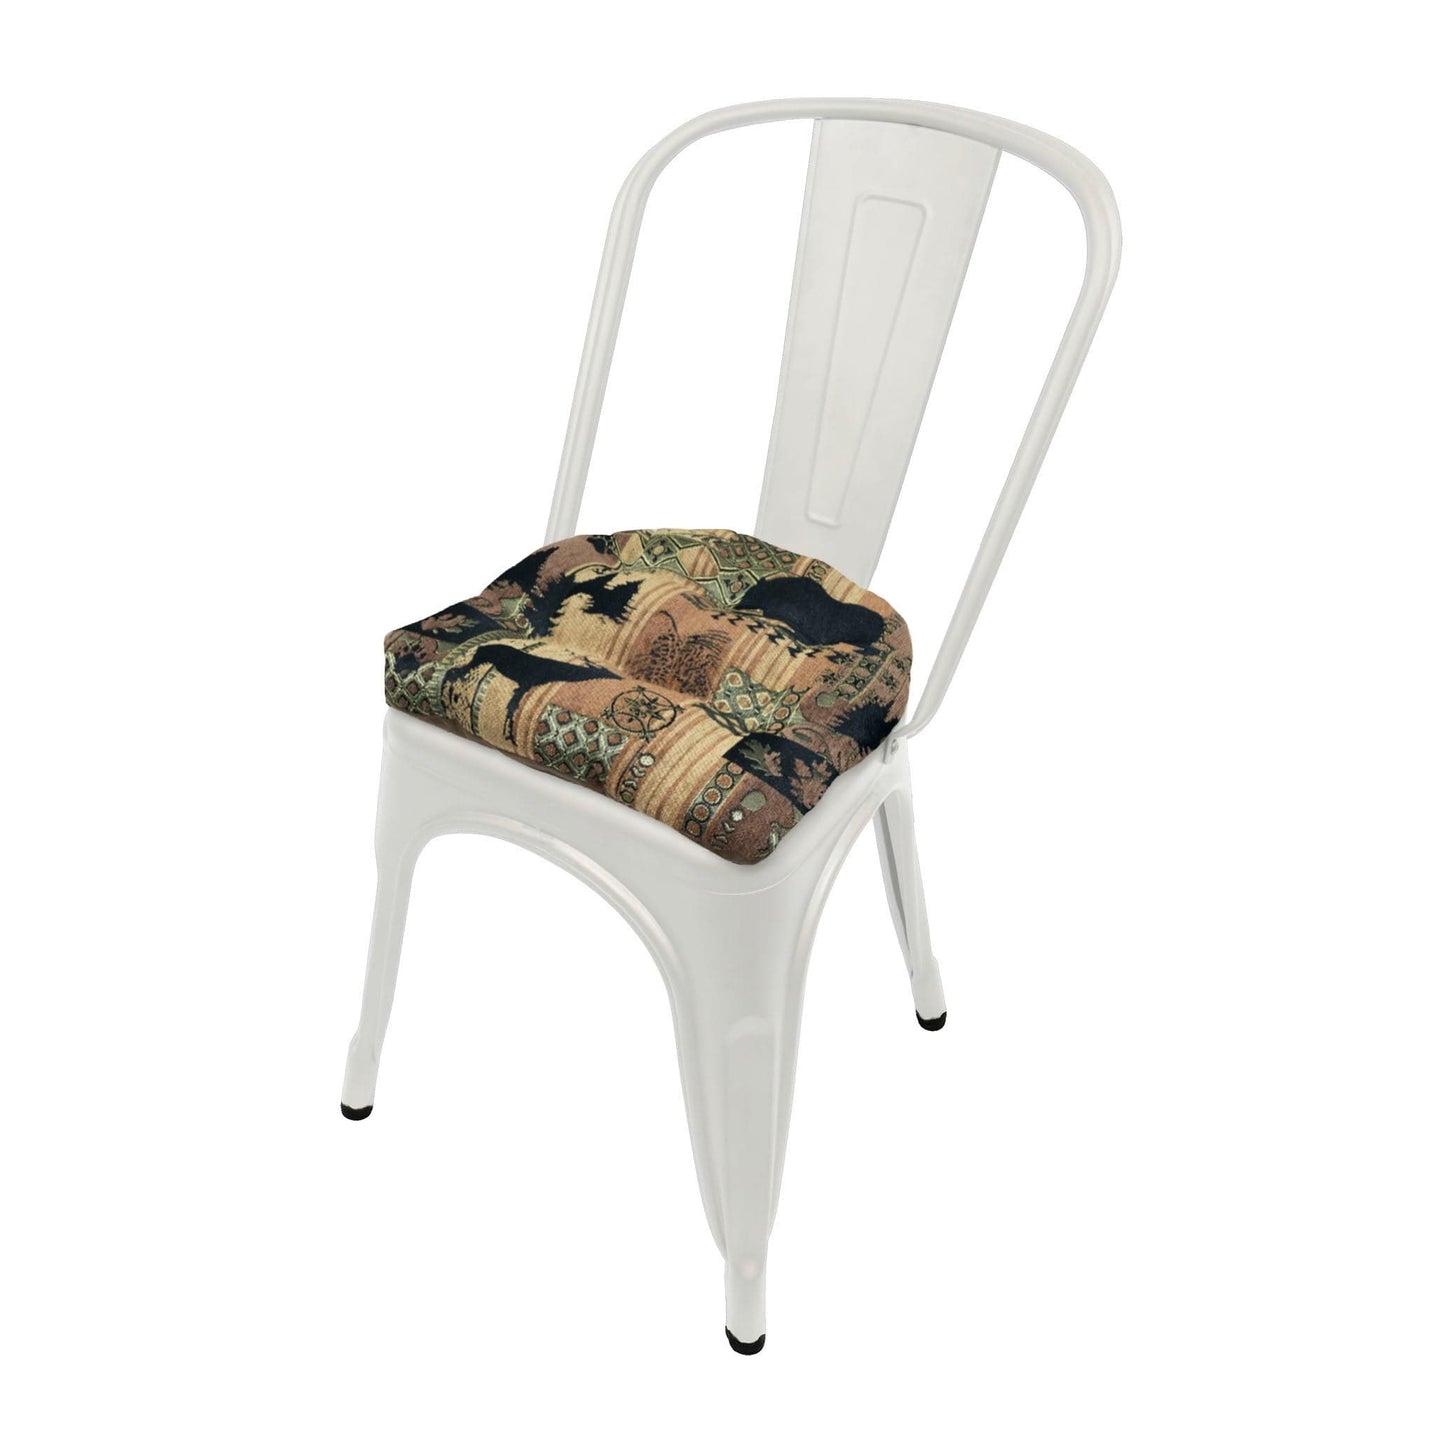 Woodlands Brentwood Industrial Chair Cushion (SET OF 6) - Latex Foam Fill - Reversible